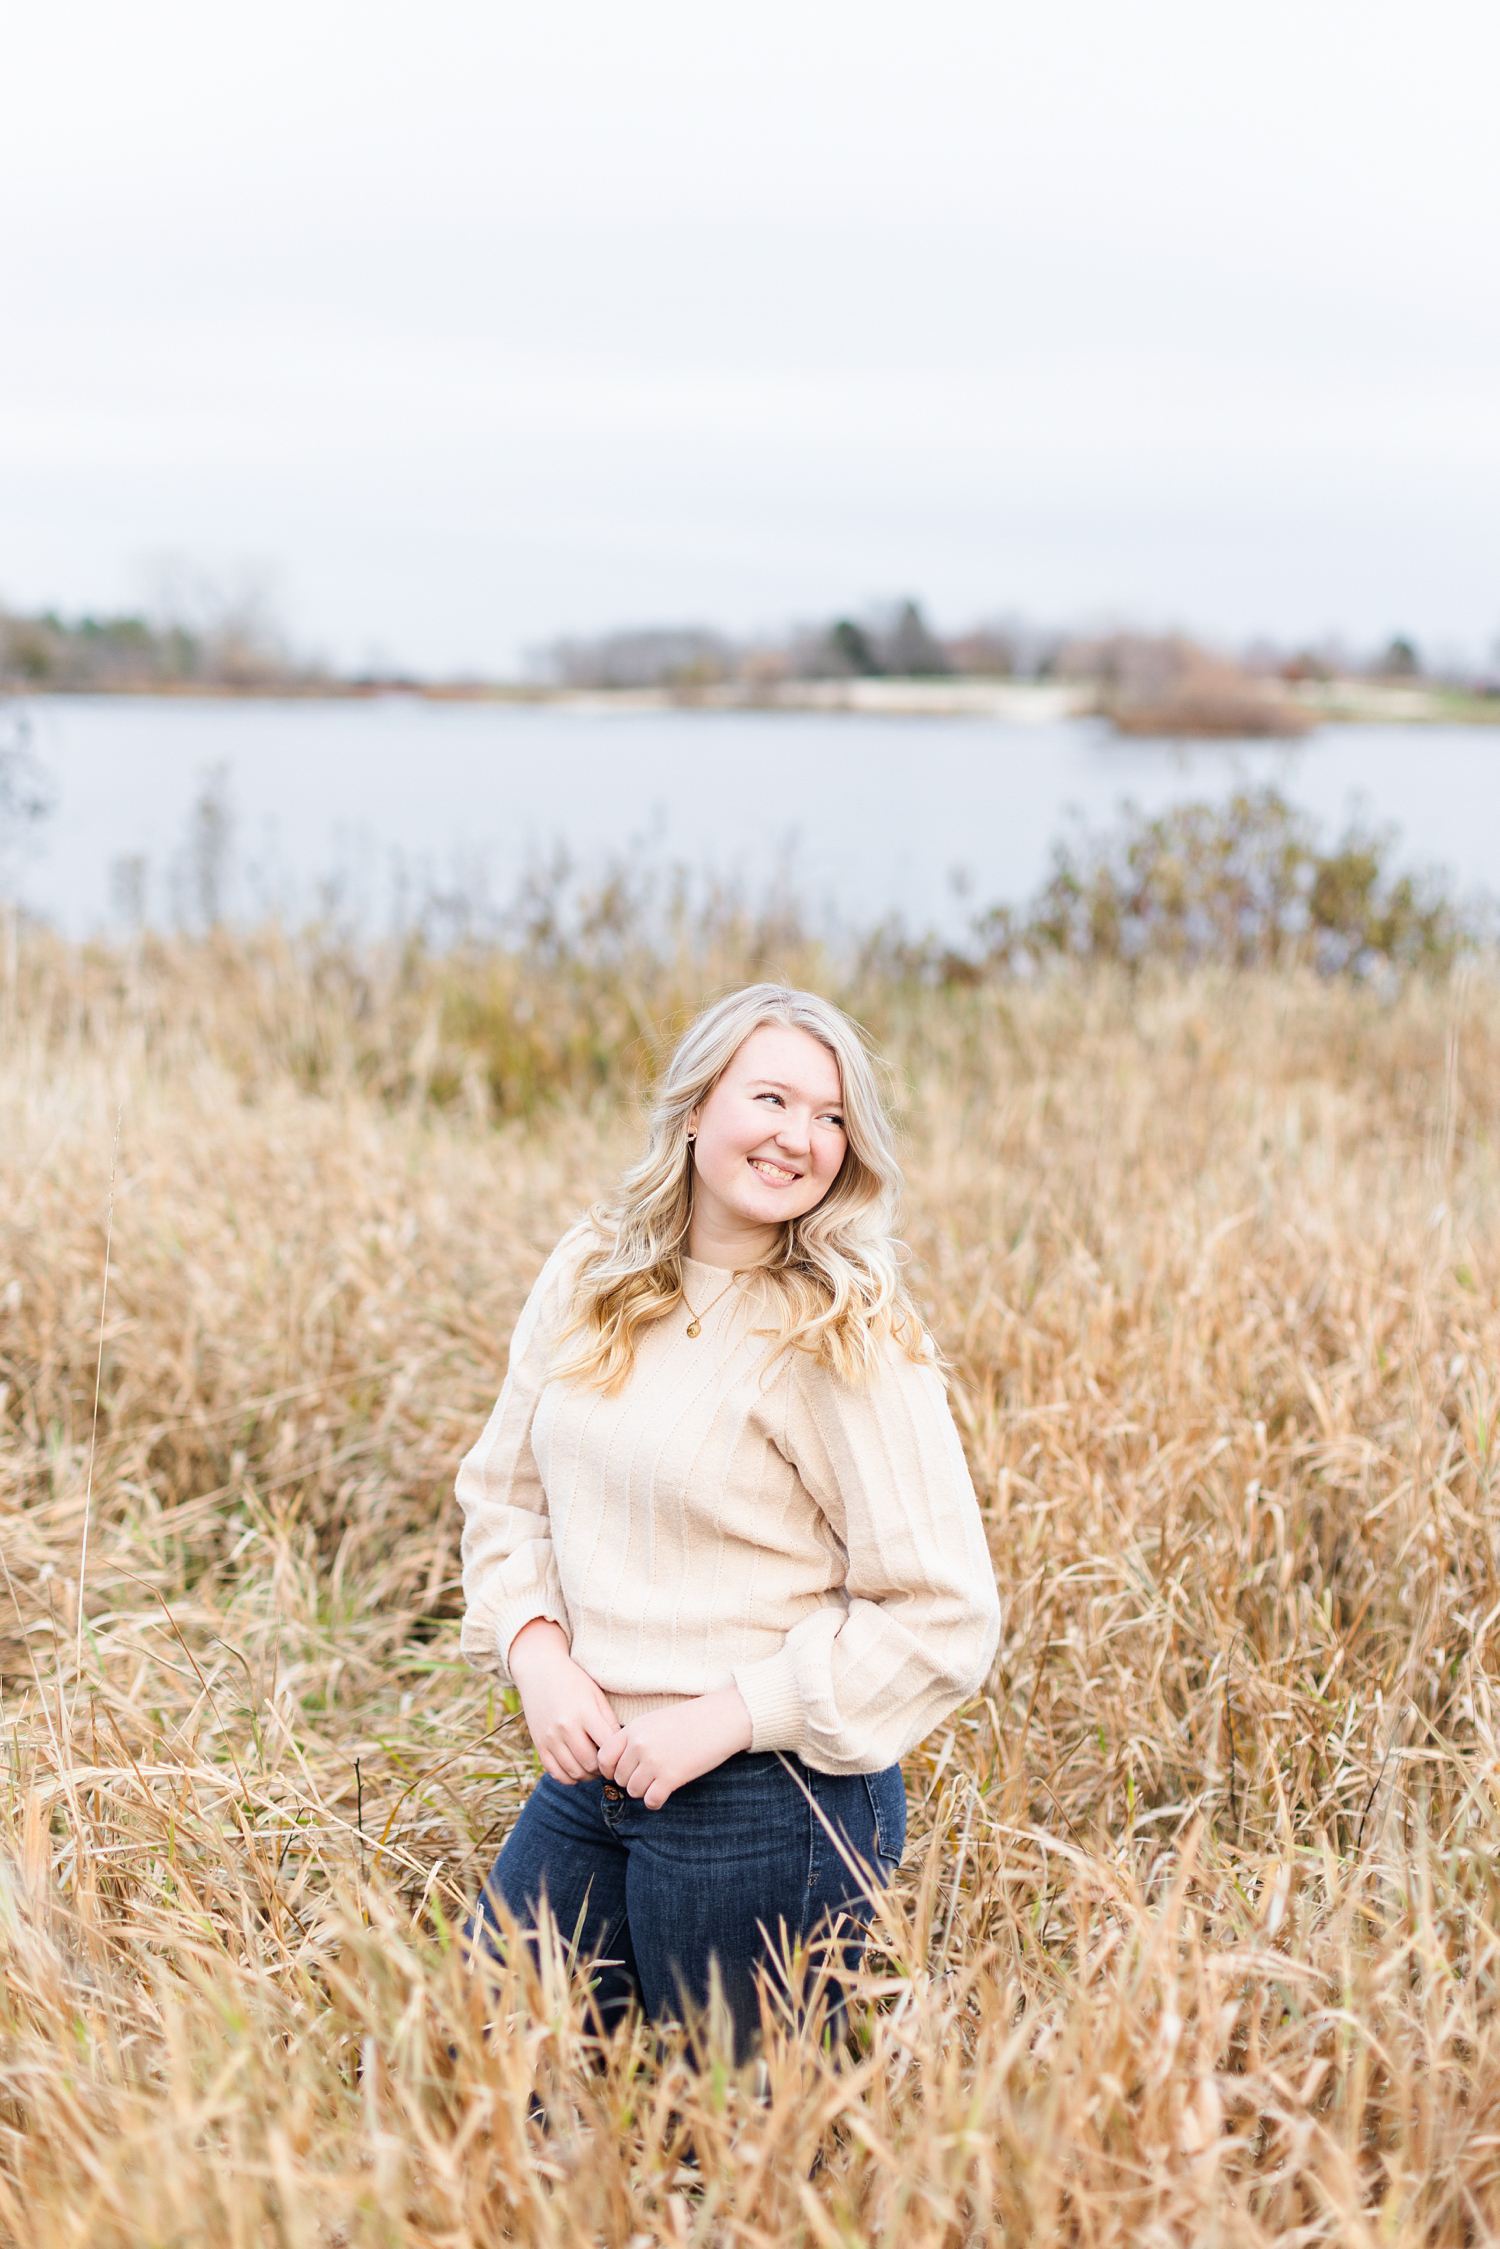 Jayden looks over her shoulder and smiles as she stands in a tall grassy field | CB Studio